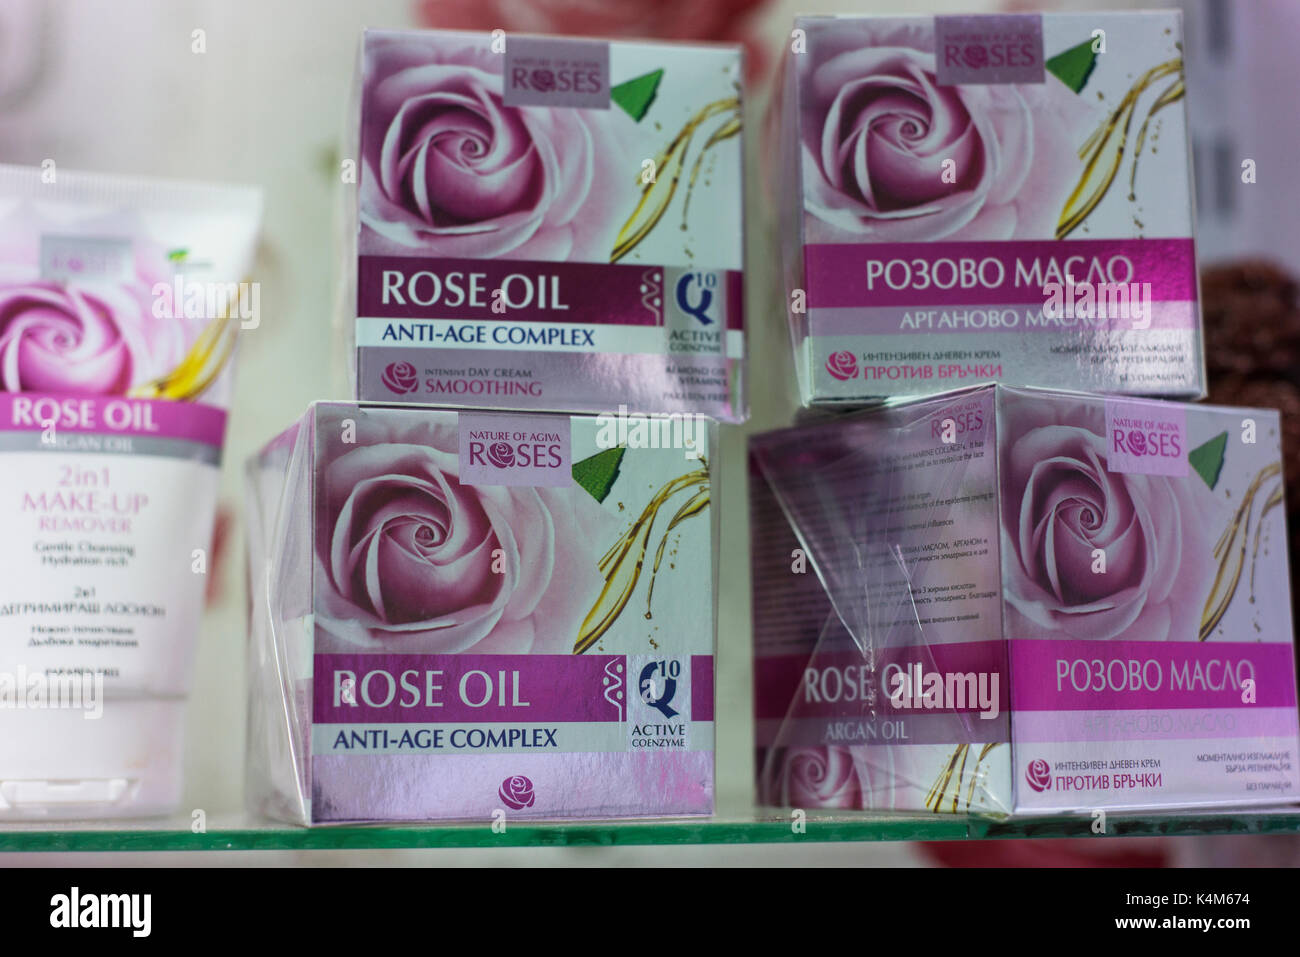 Rose oil, promoted to combat aging, for sale in Veliko Tarnovo.  Bulgaria has been producing rose oil for centuries in Rose Valley. Stock Photo